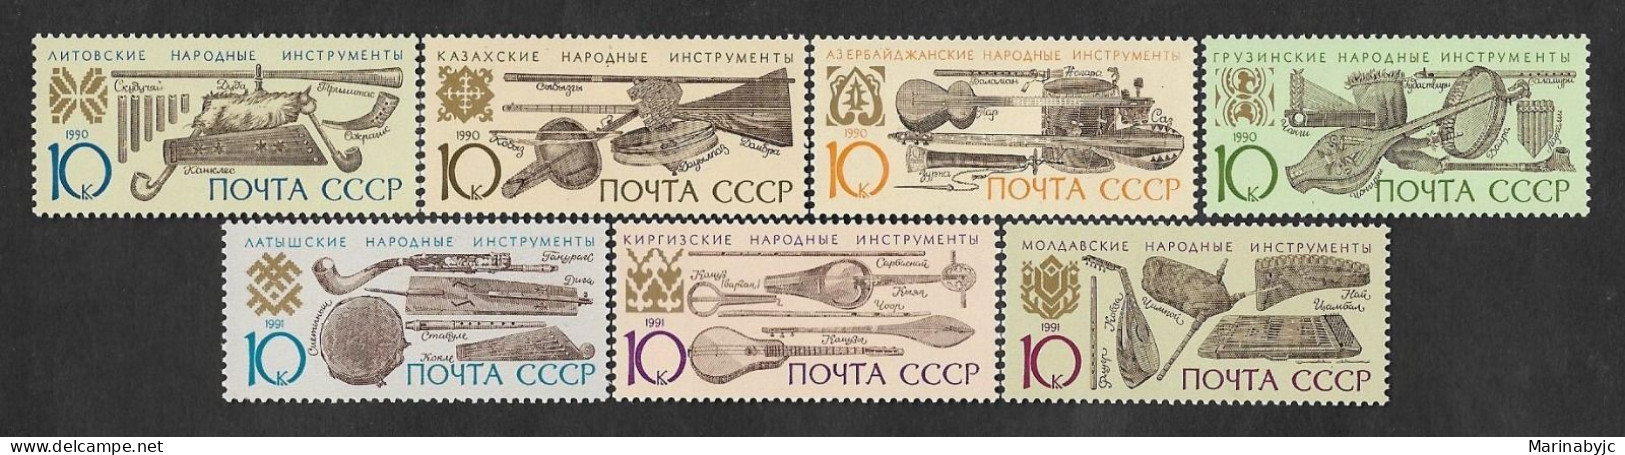 SE)1990-91 RUSSIA, COMPLETE SERIES OF TRADITIONAL MUSICAL INSTRUMENTS, 7 MNH STAMPS - Used Stamps